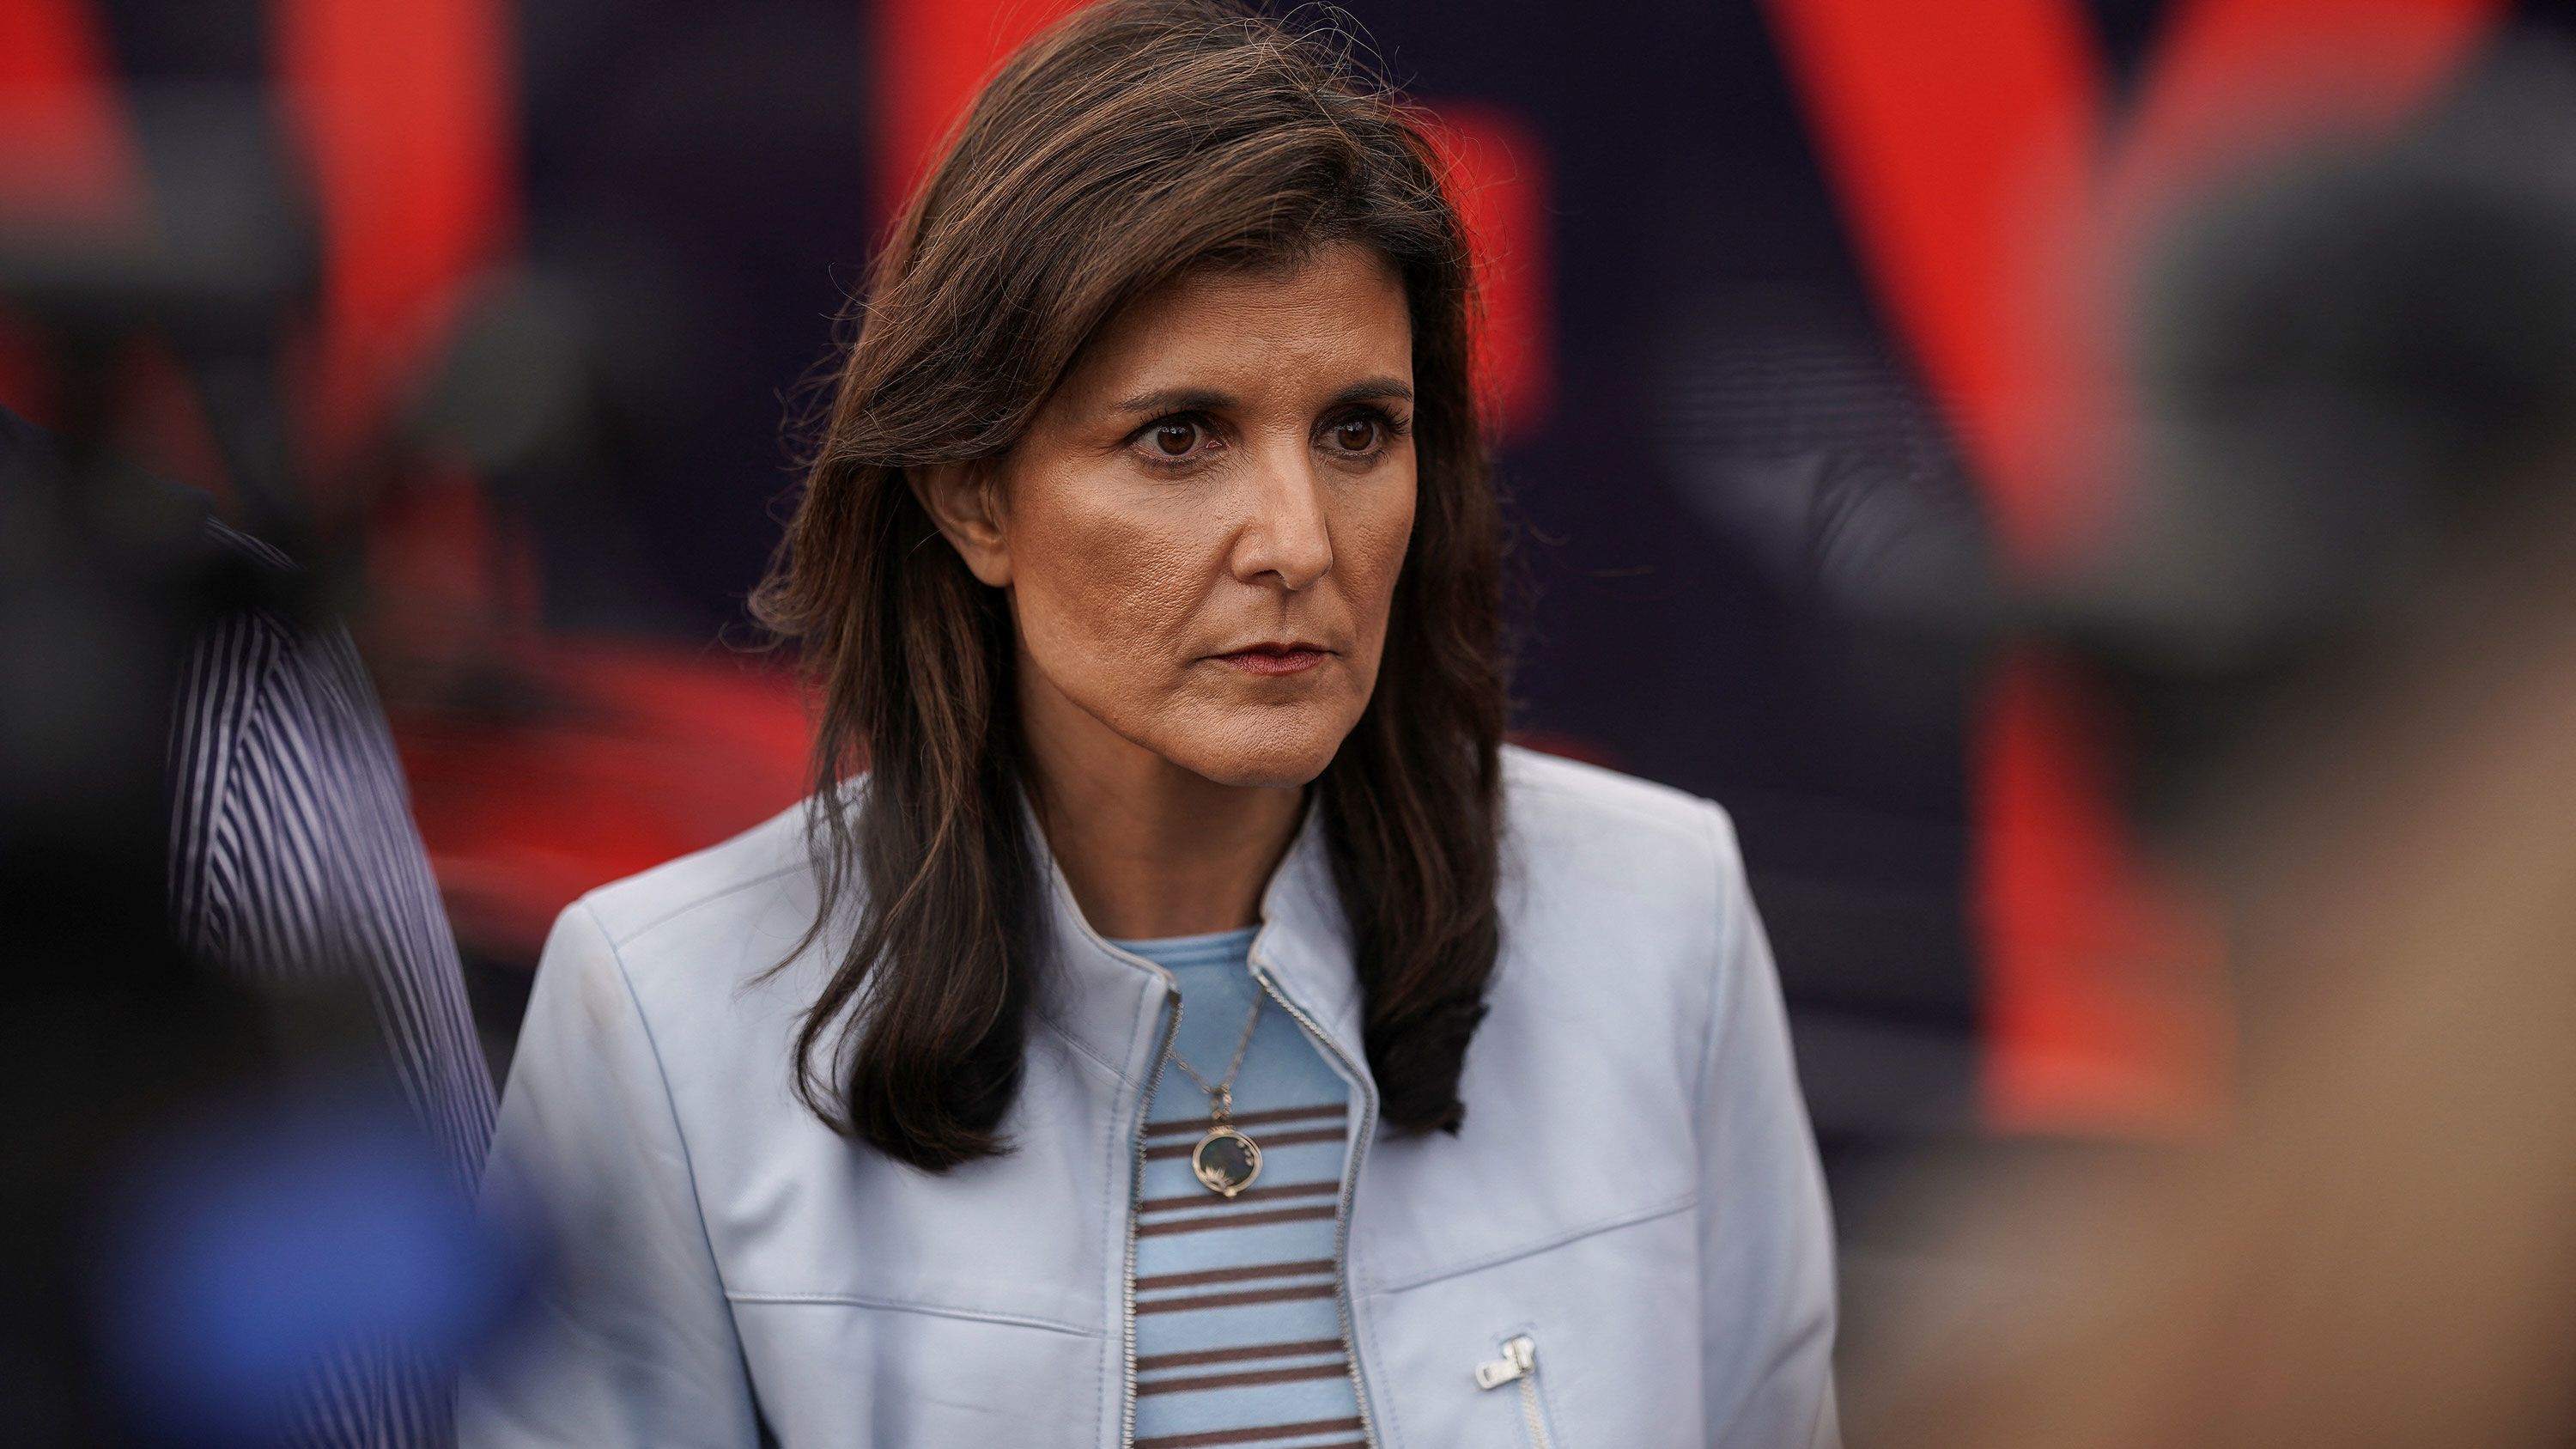 Haley moves closer to getting Secret Service protection after